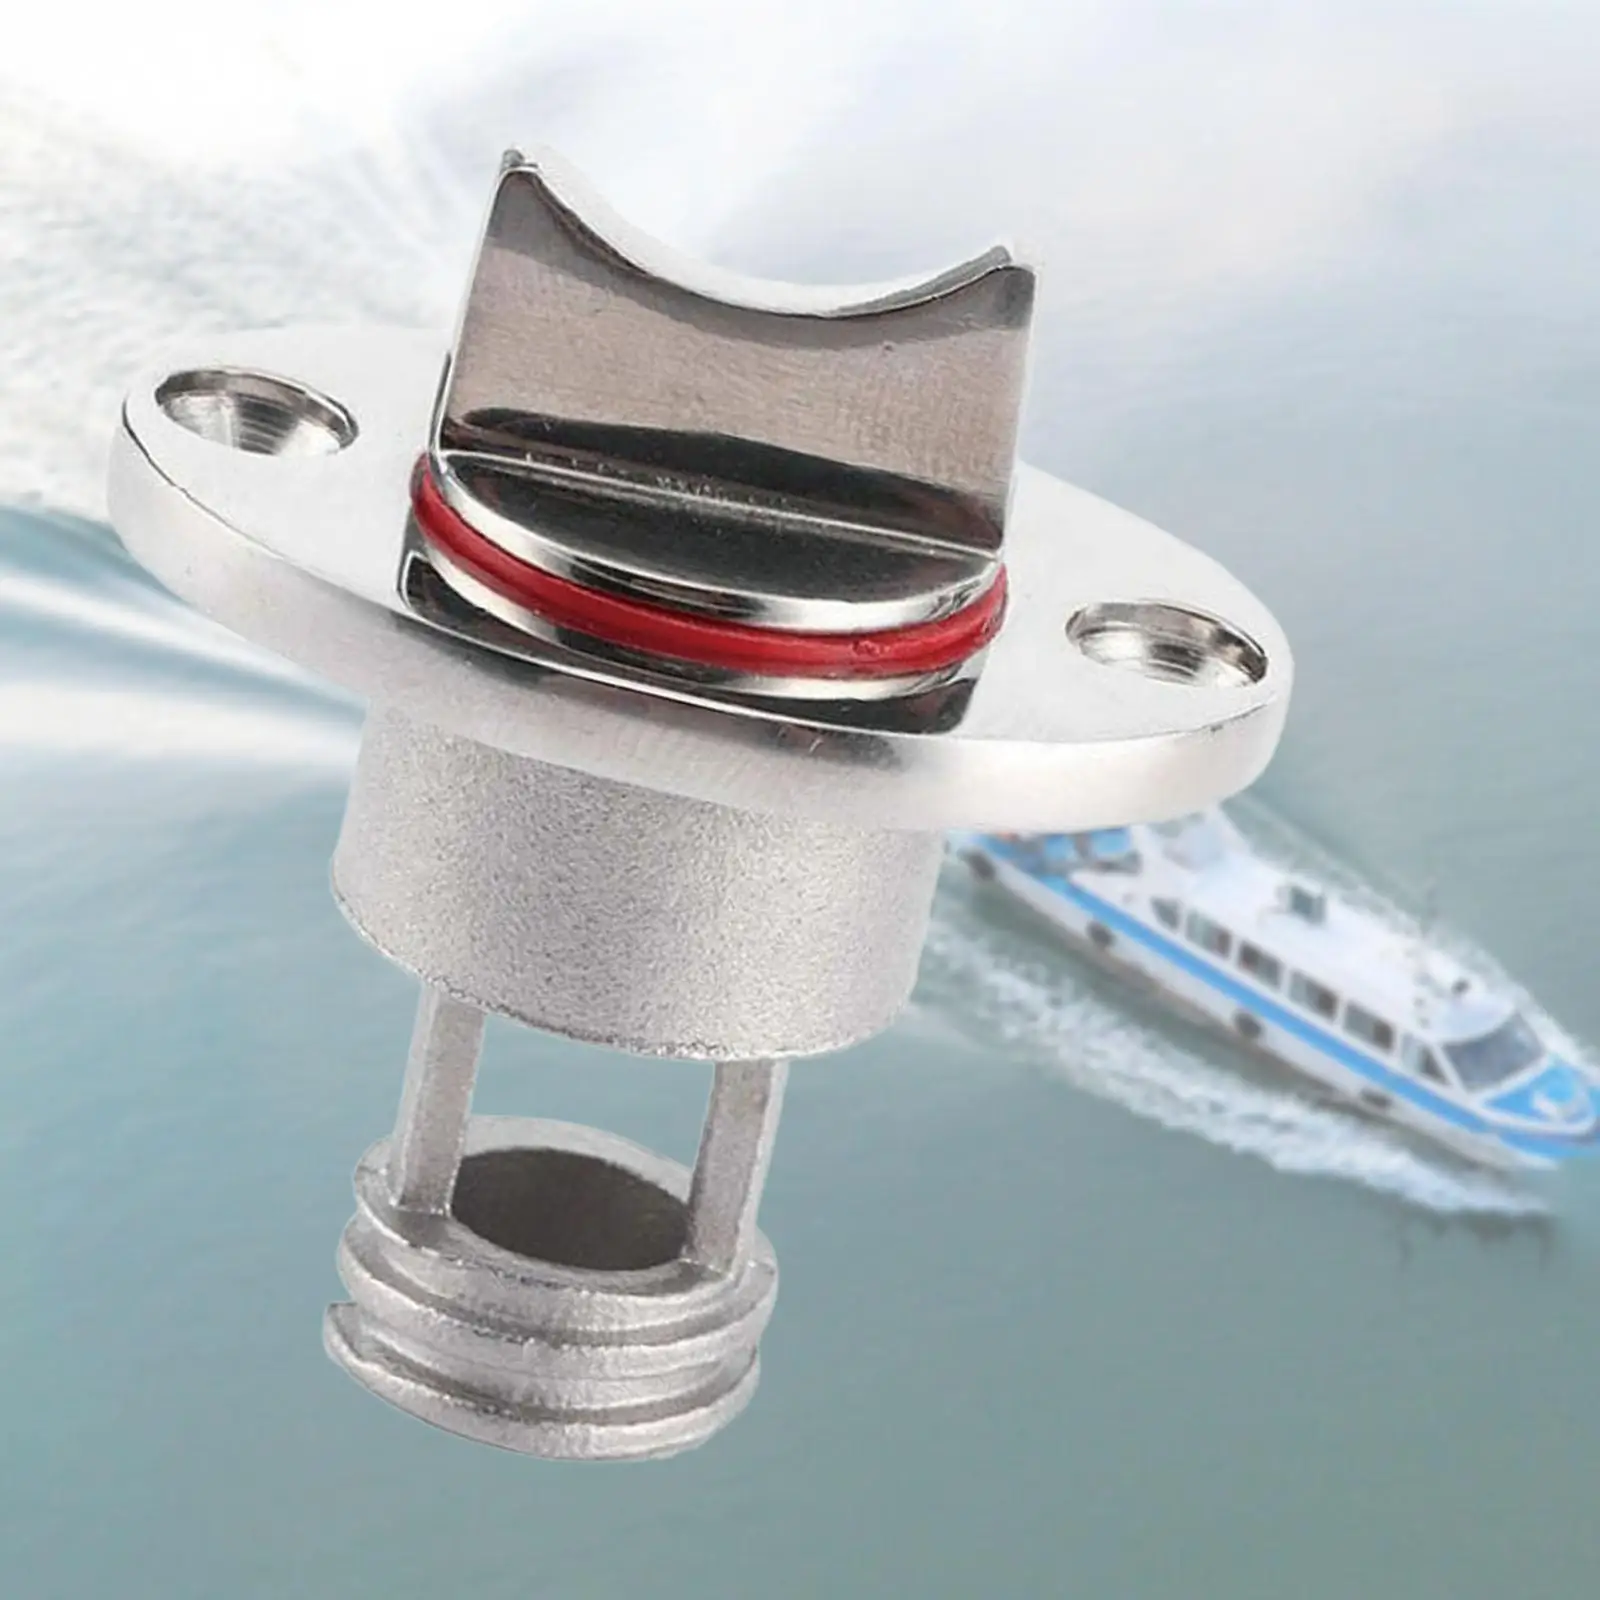 Drain Plug Sturdy Simple Easy to Install Repair Boat Part for Boat